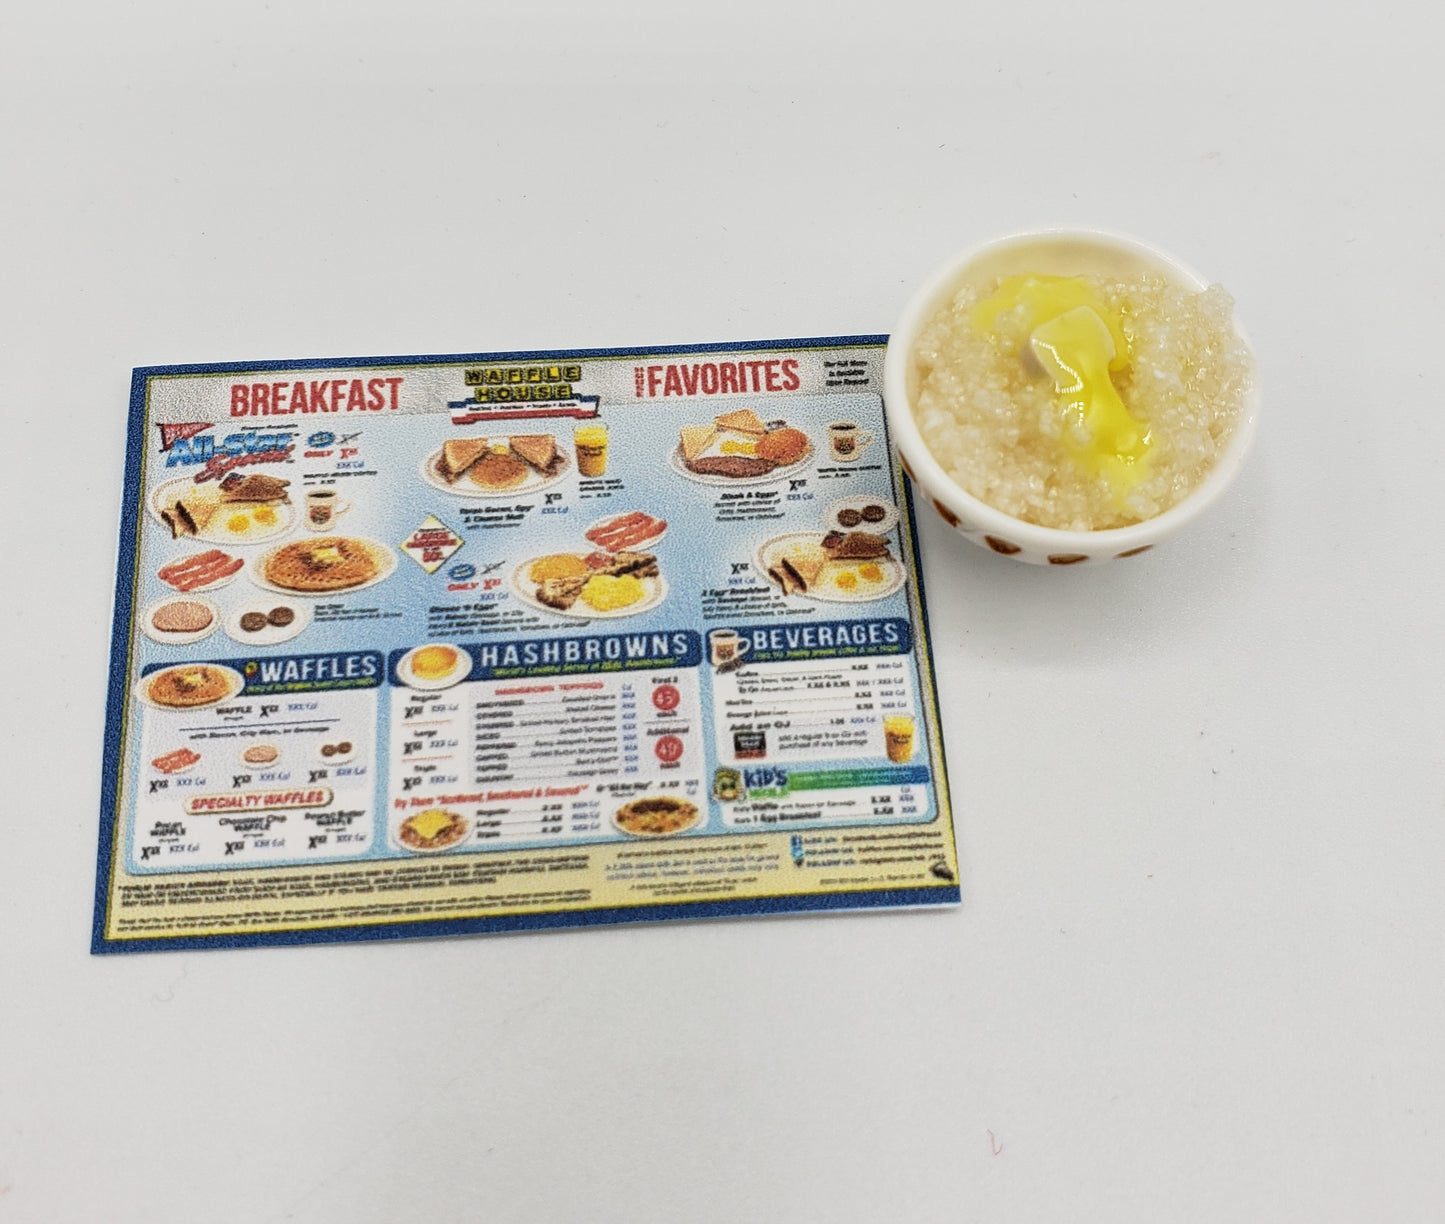 grits for barbie size dolls with a waffle house menu